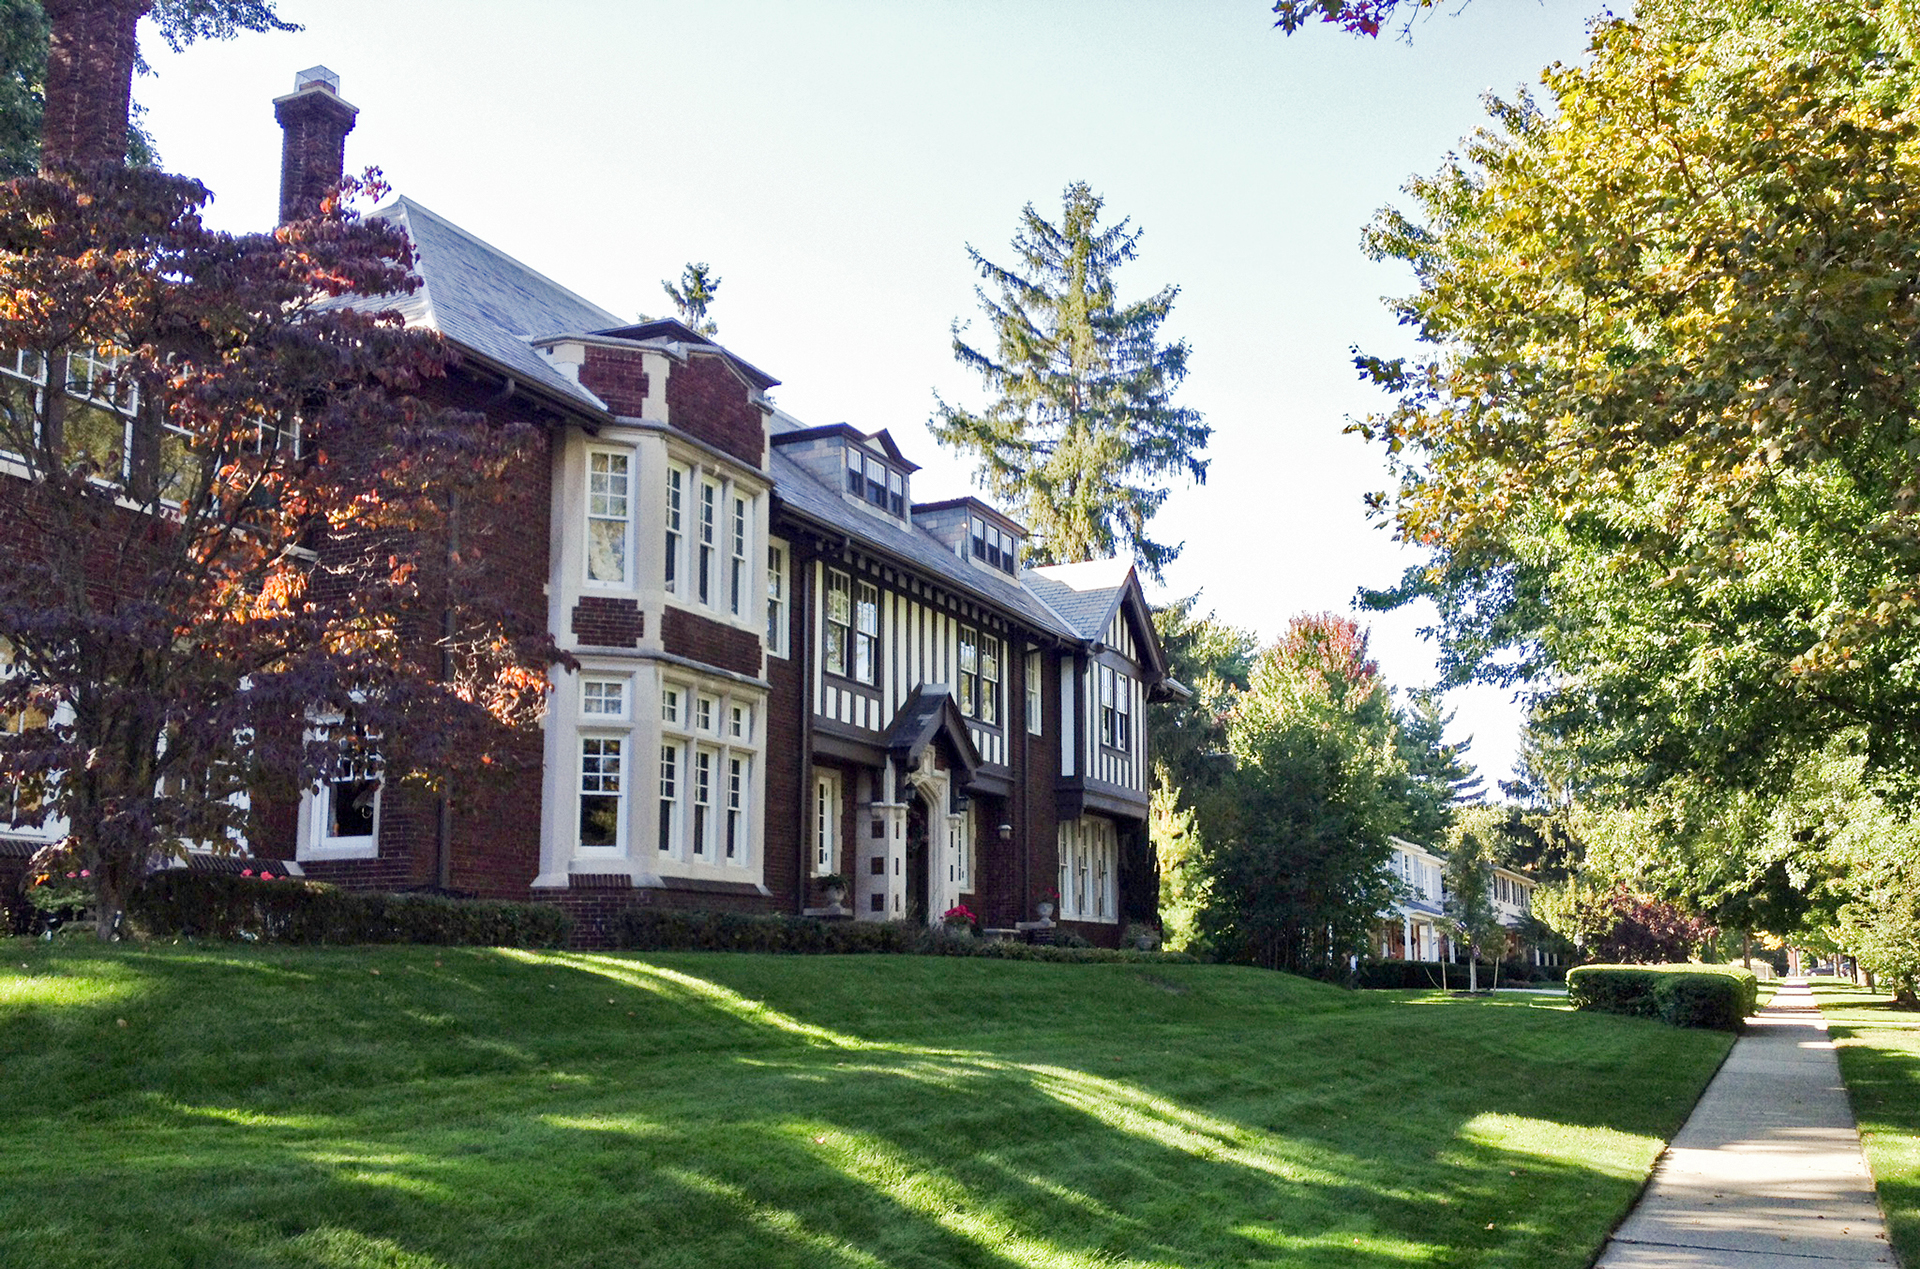 The Secrets of Grosse Pointe Patrick Ahearn Architect